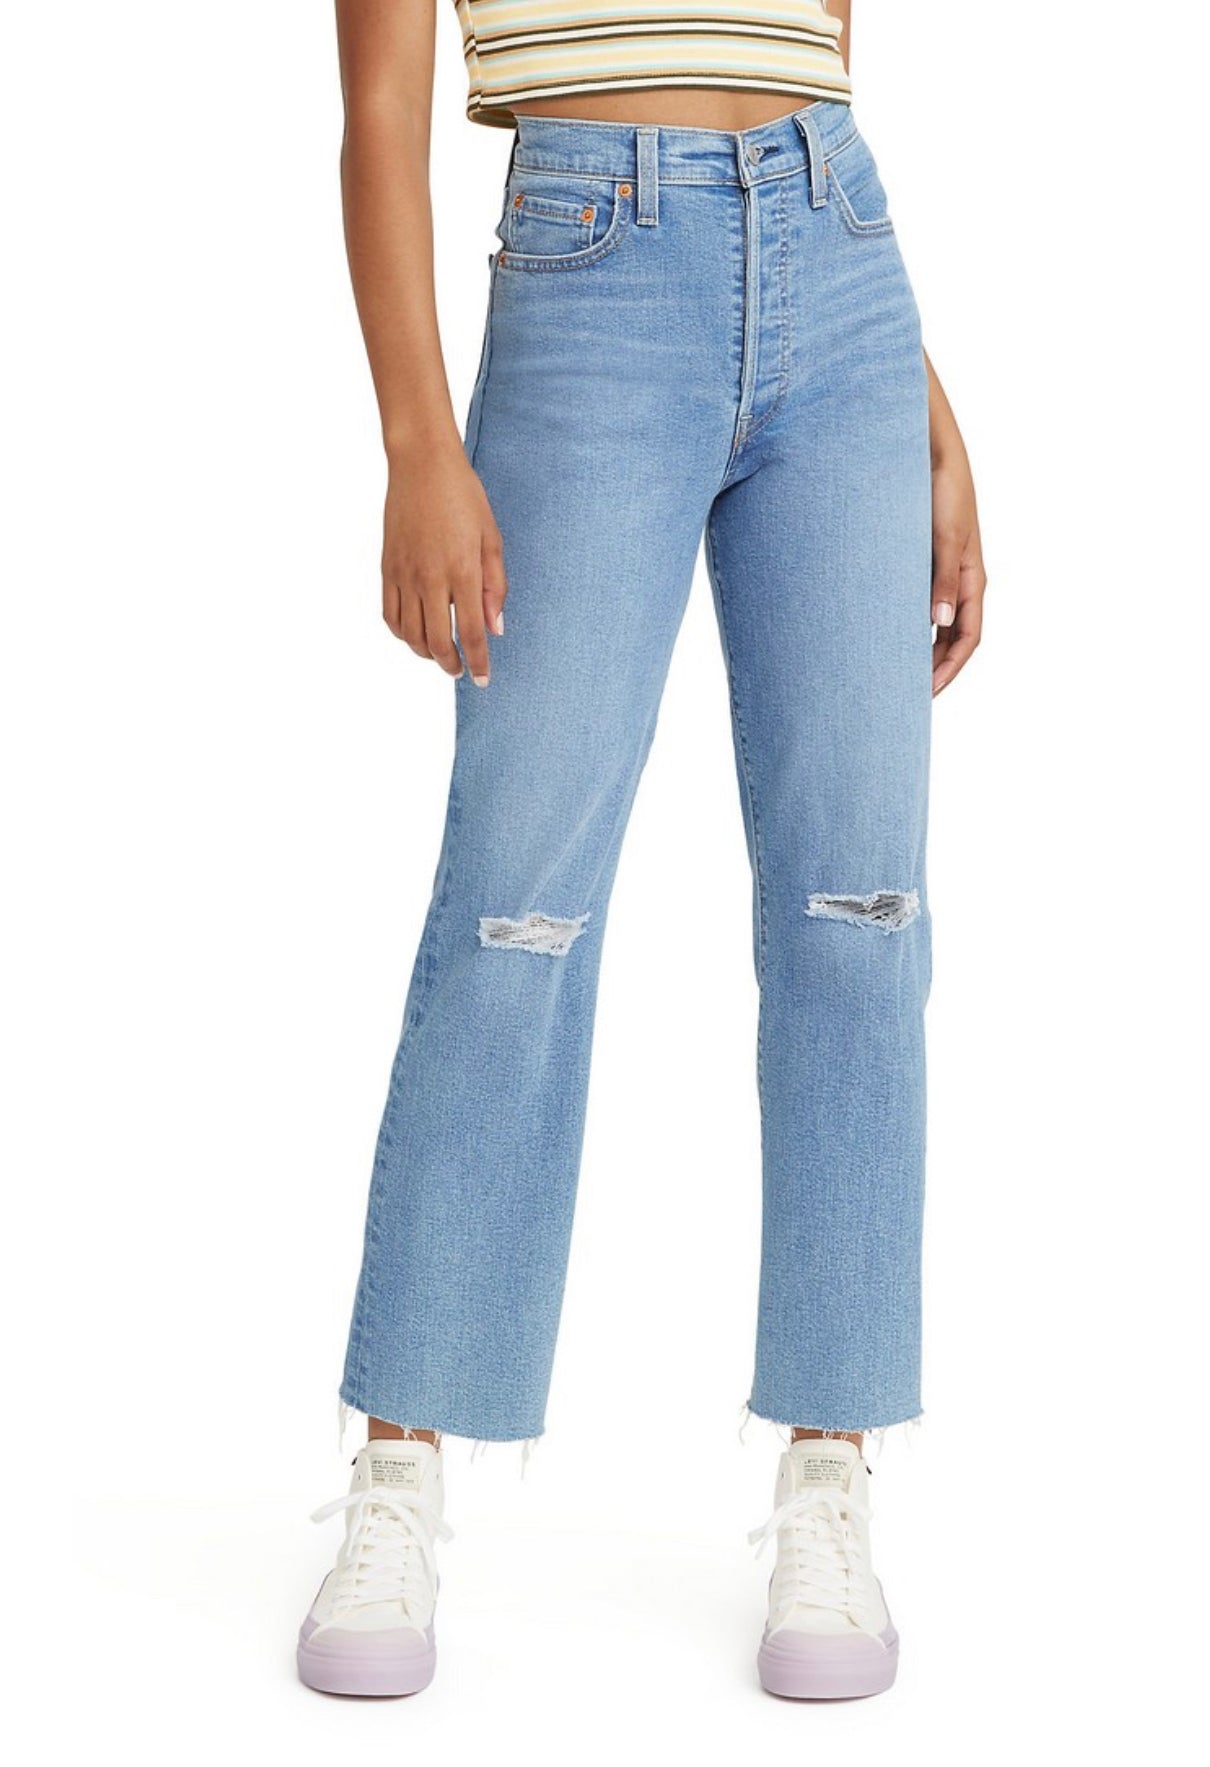 LEVIS WOMEN'S RIBCAGE STRAIGHT ANKLE L-27